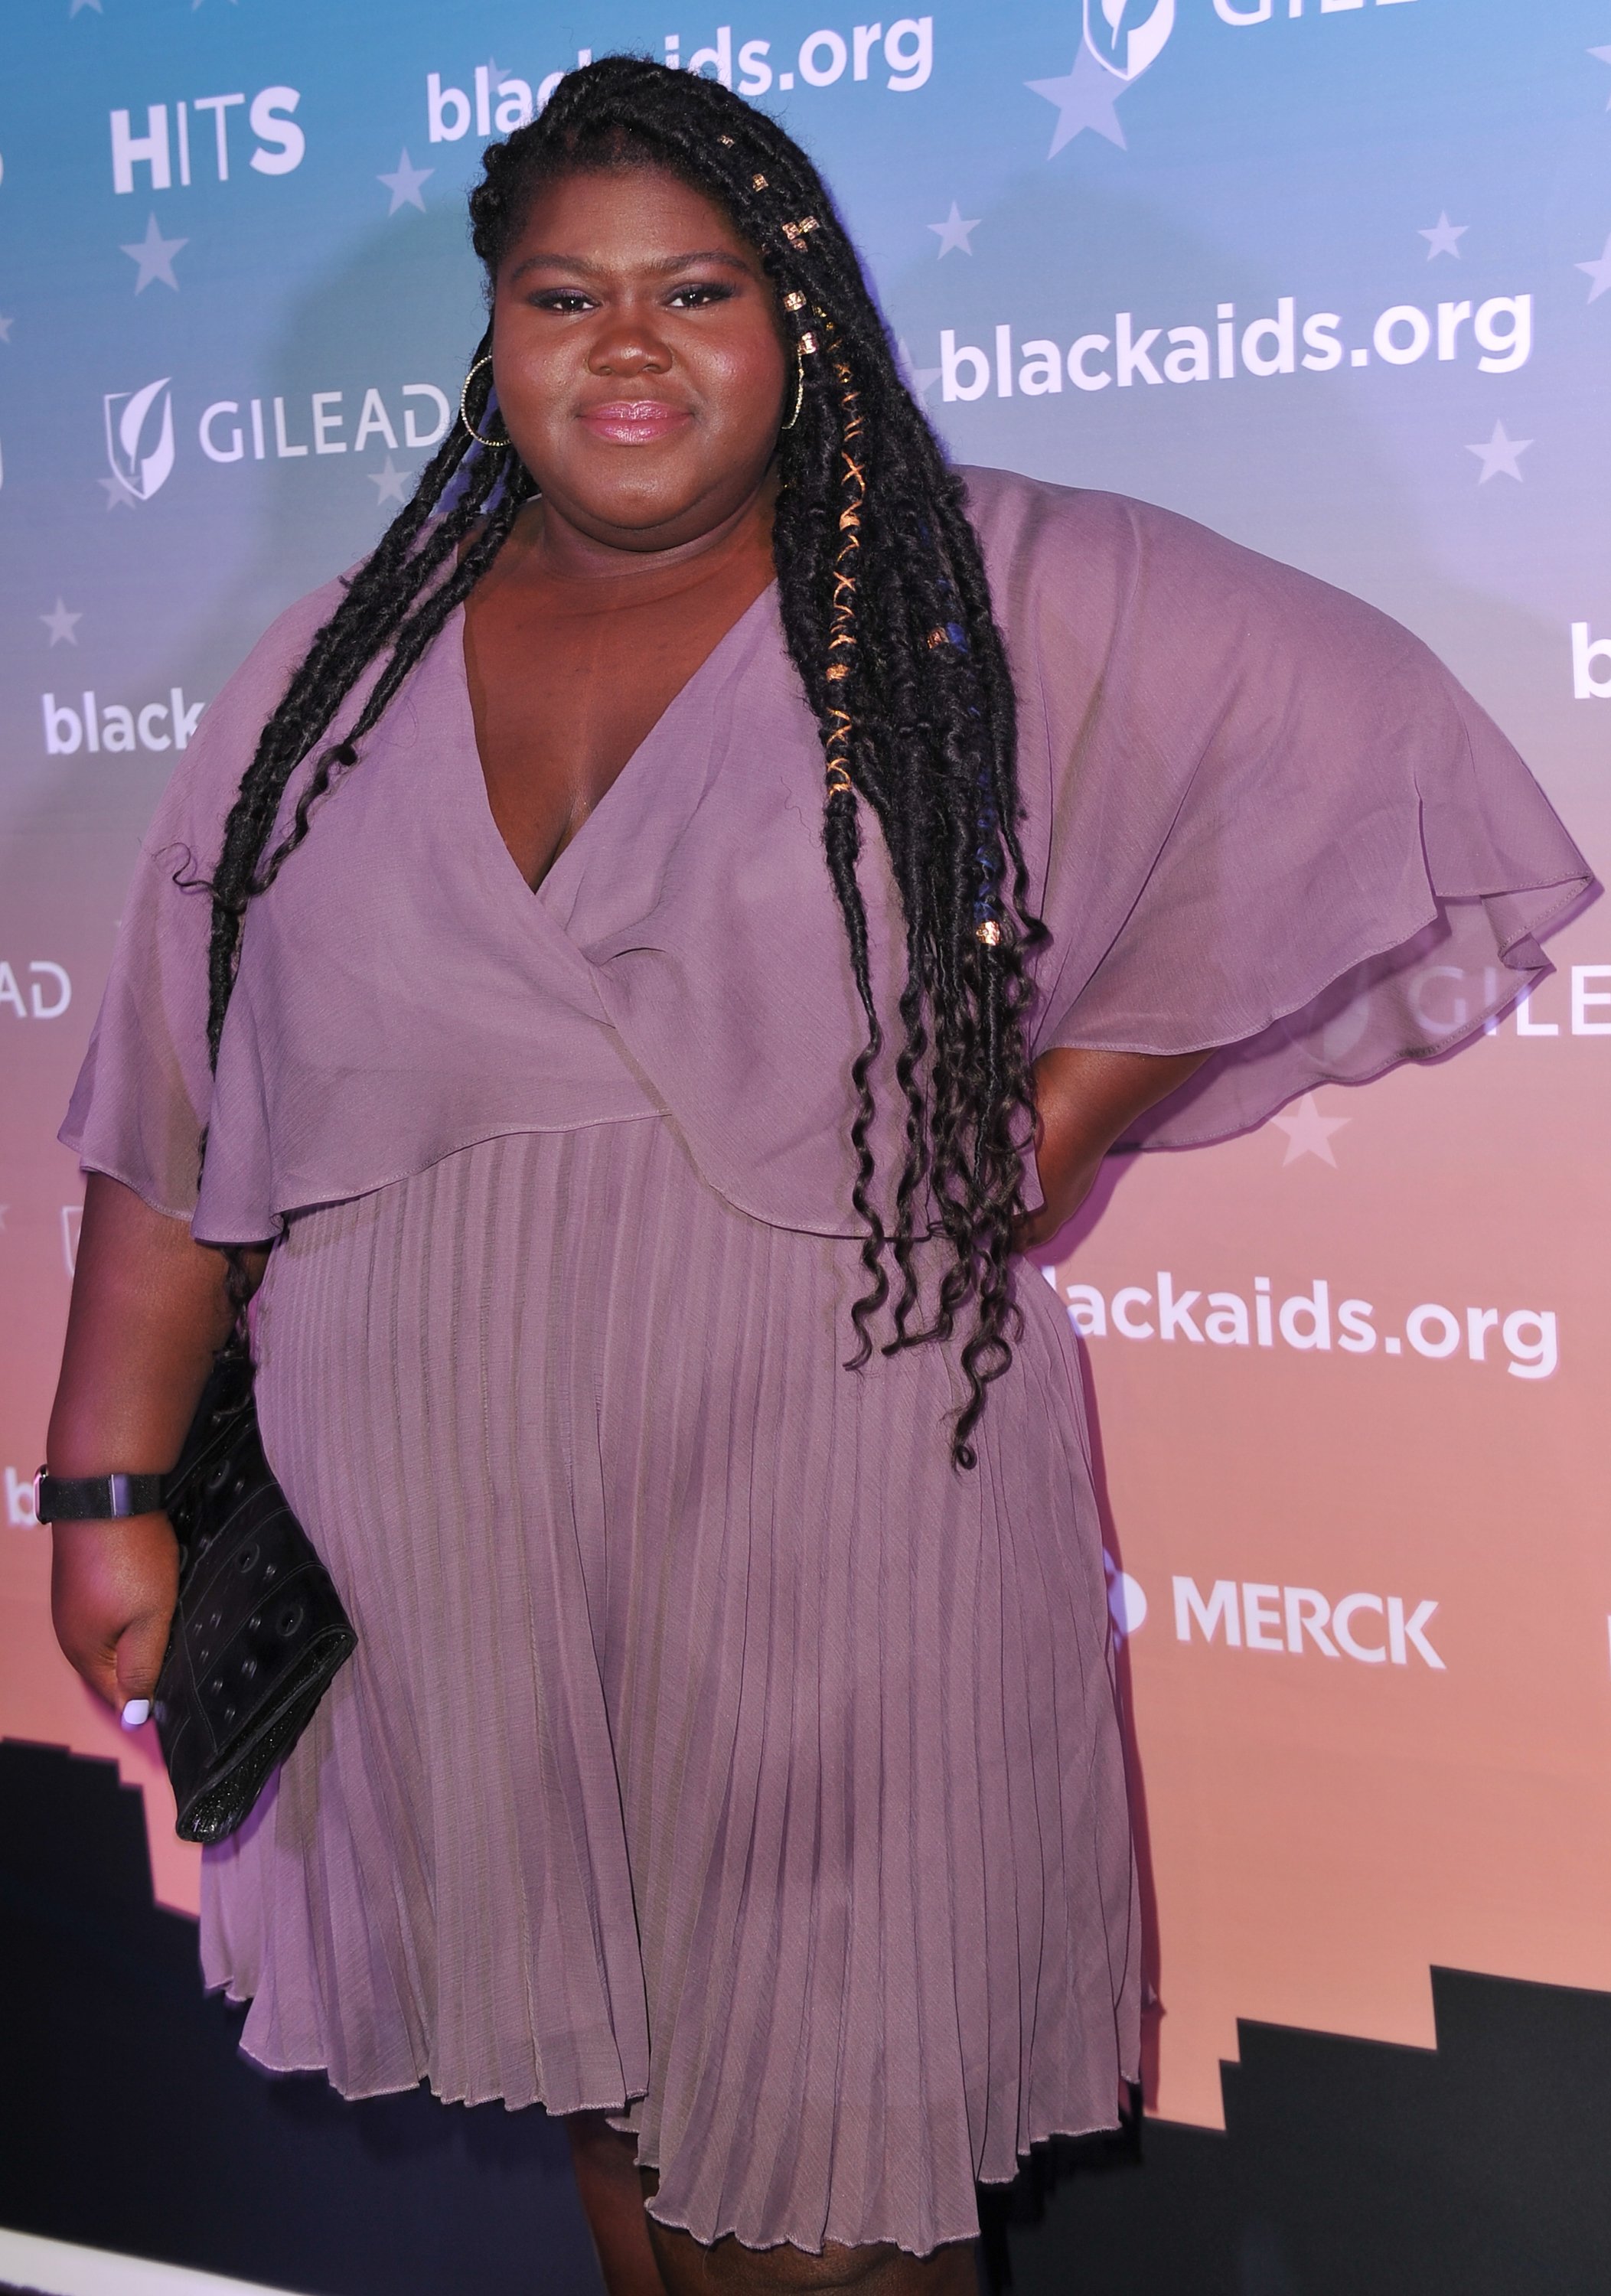 Gabby Sidibe on December 01, 2018 in Los Angeles, California | Photo: Getty Images